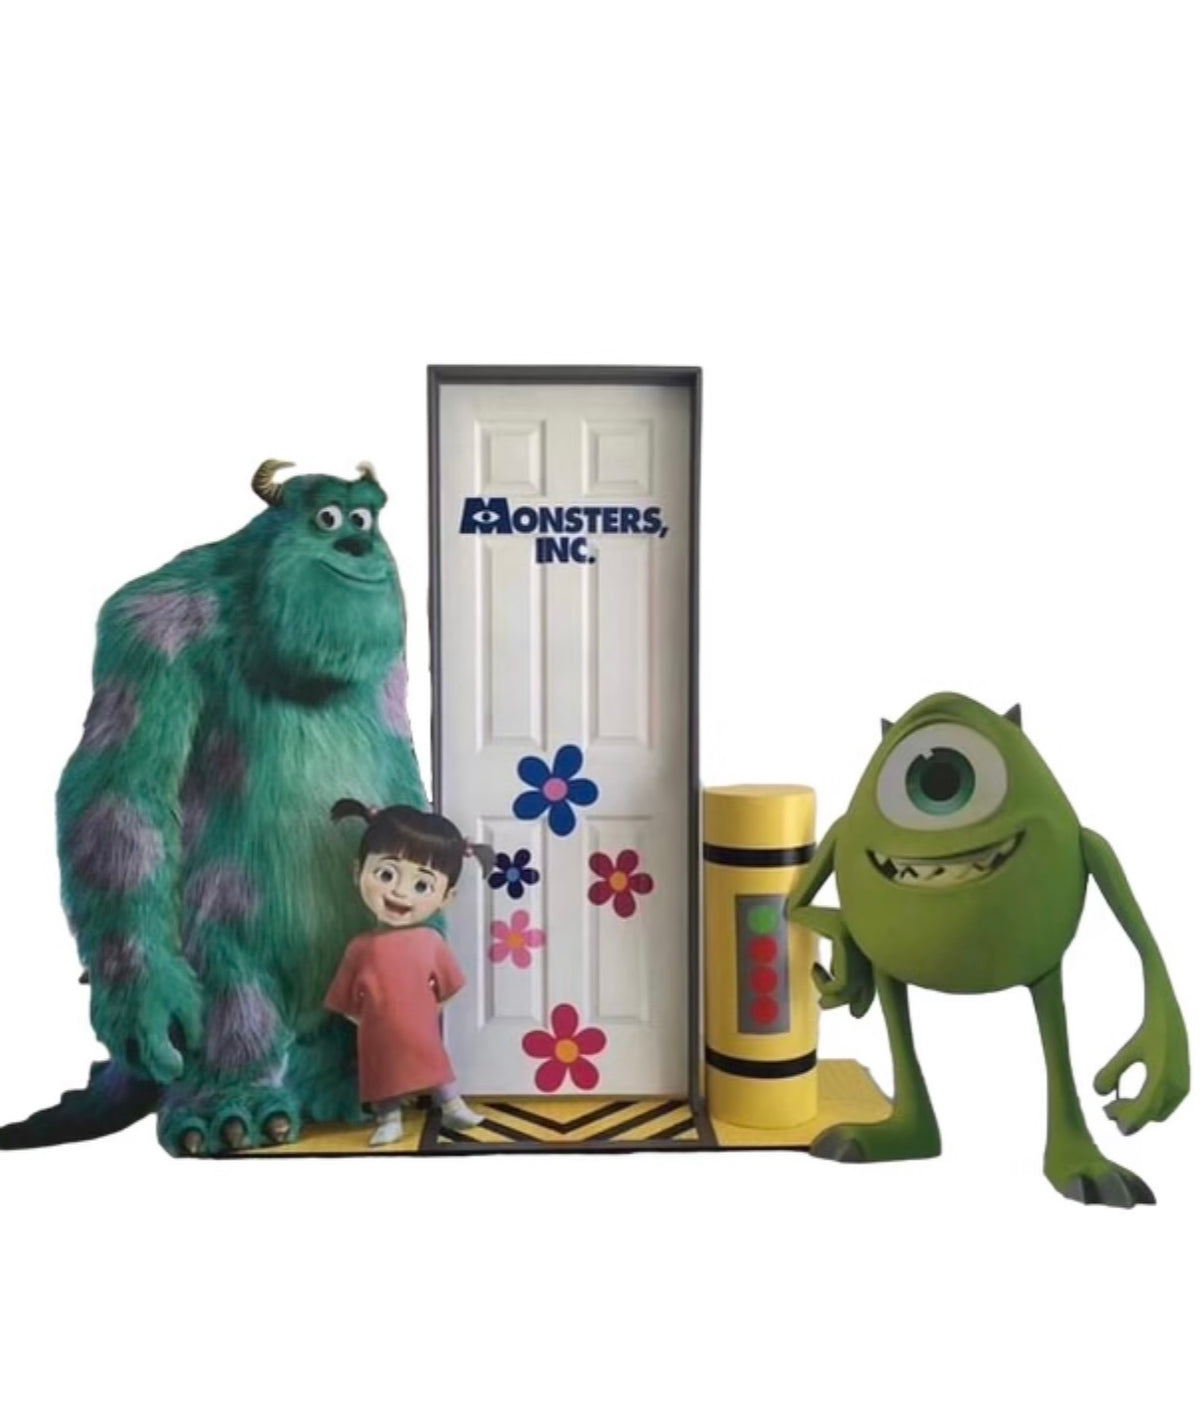 Monsters Inc. Package – Platinum Prop House, Inc., monsters inc 